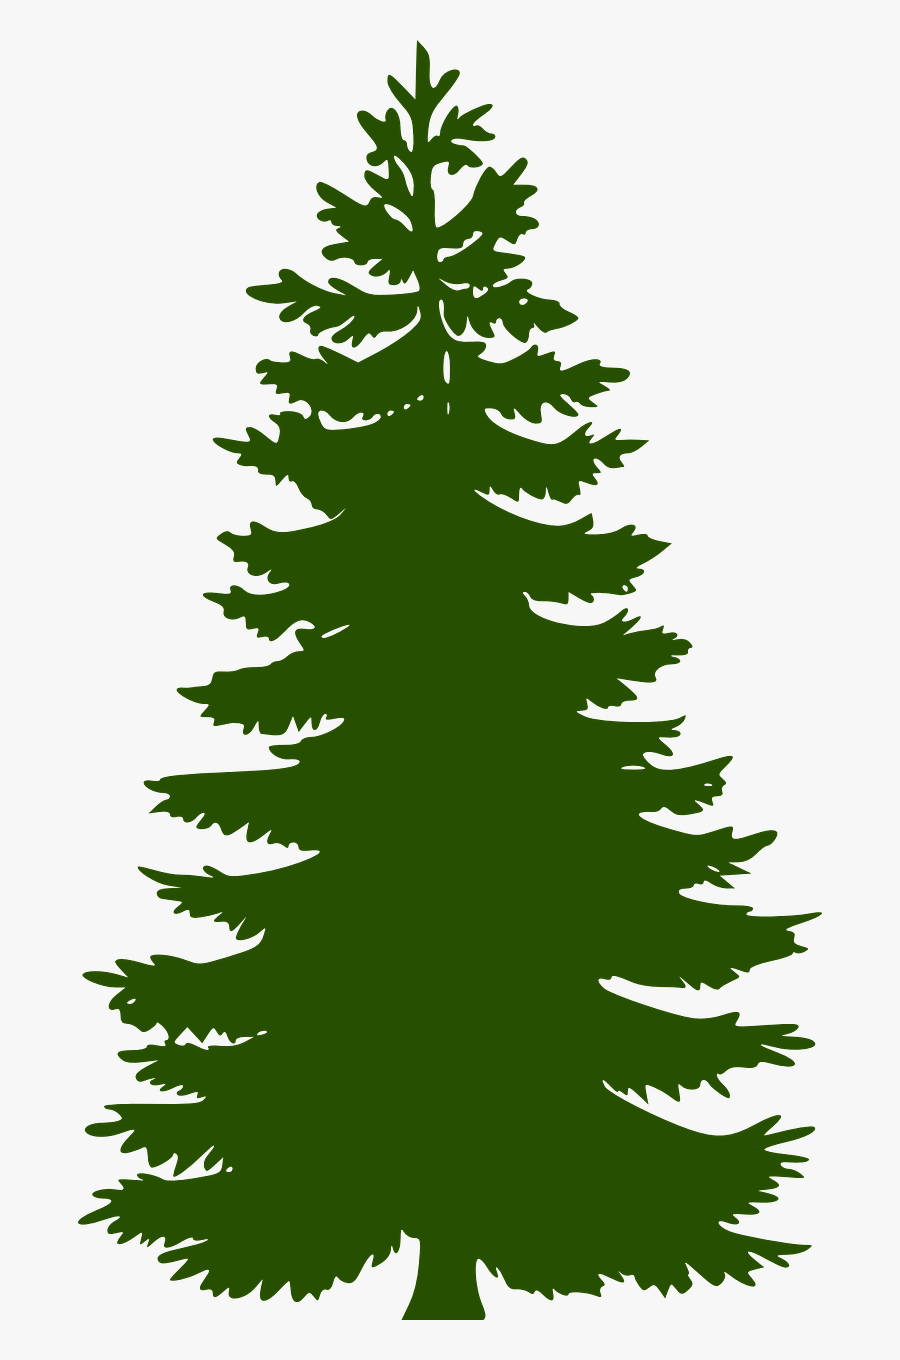 Pine Tree Vector Png, Transparent Clipart